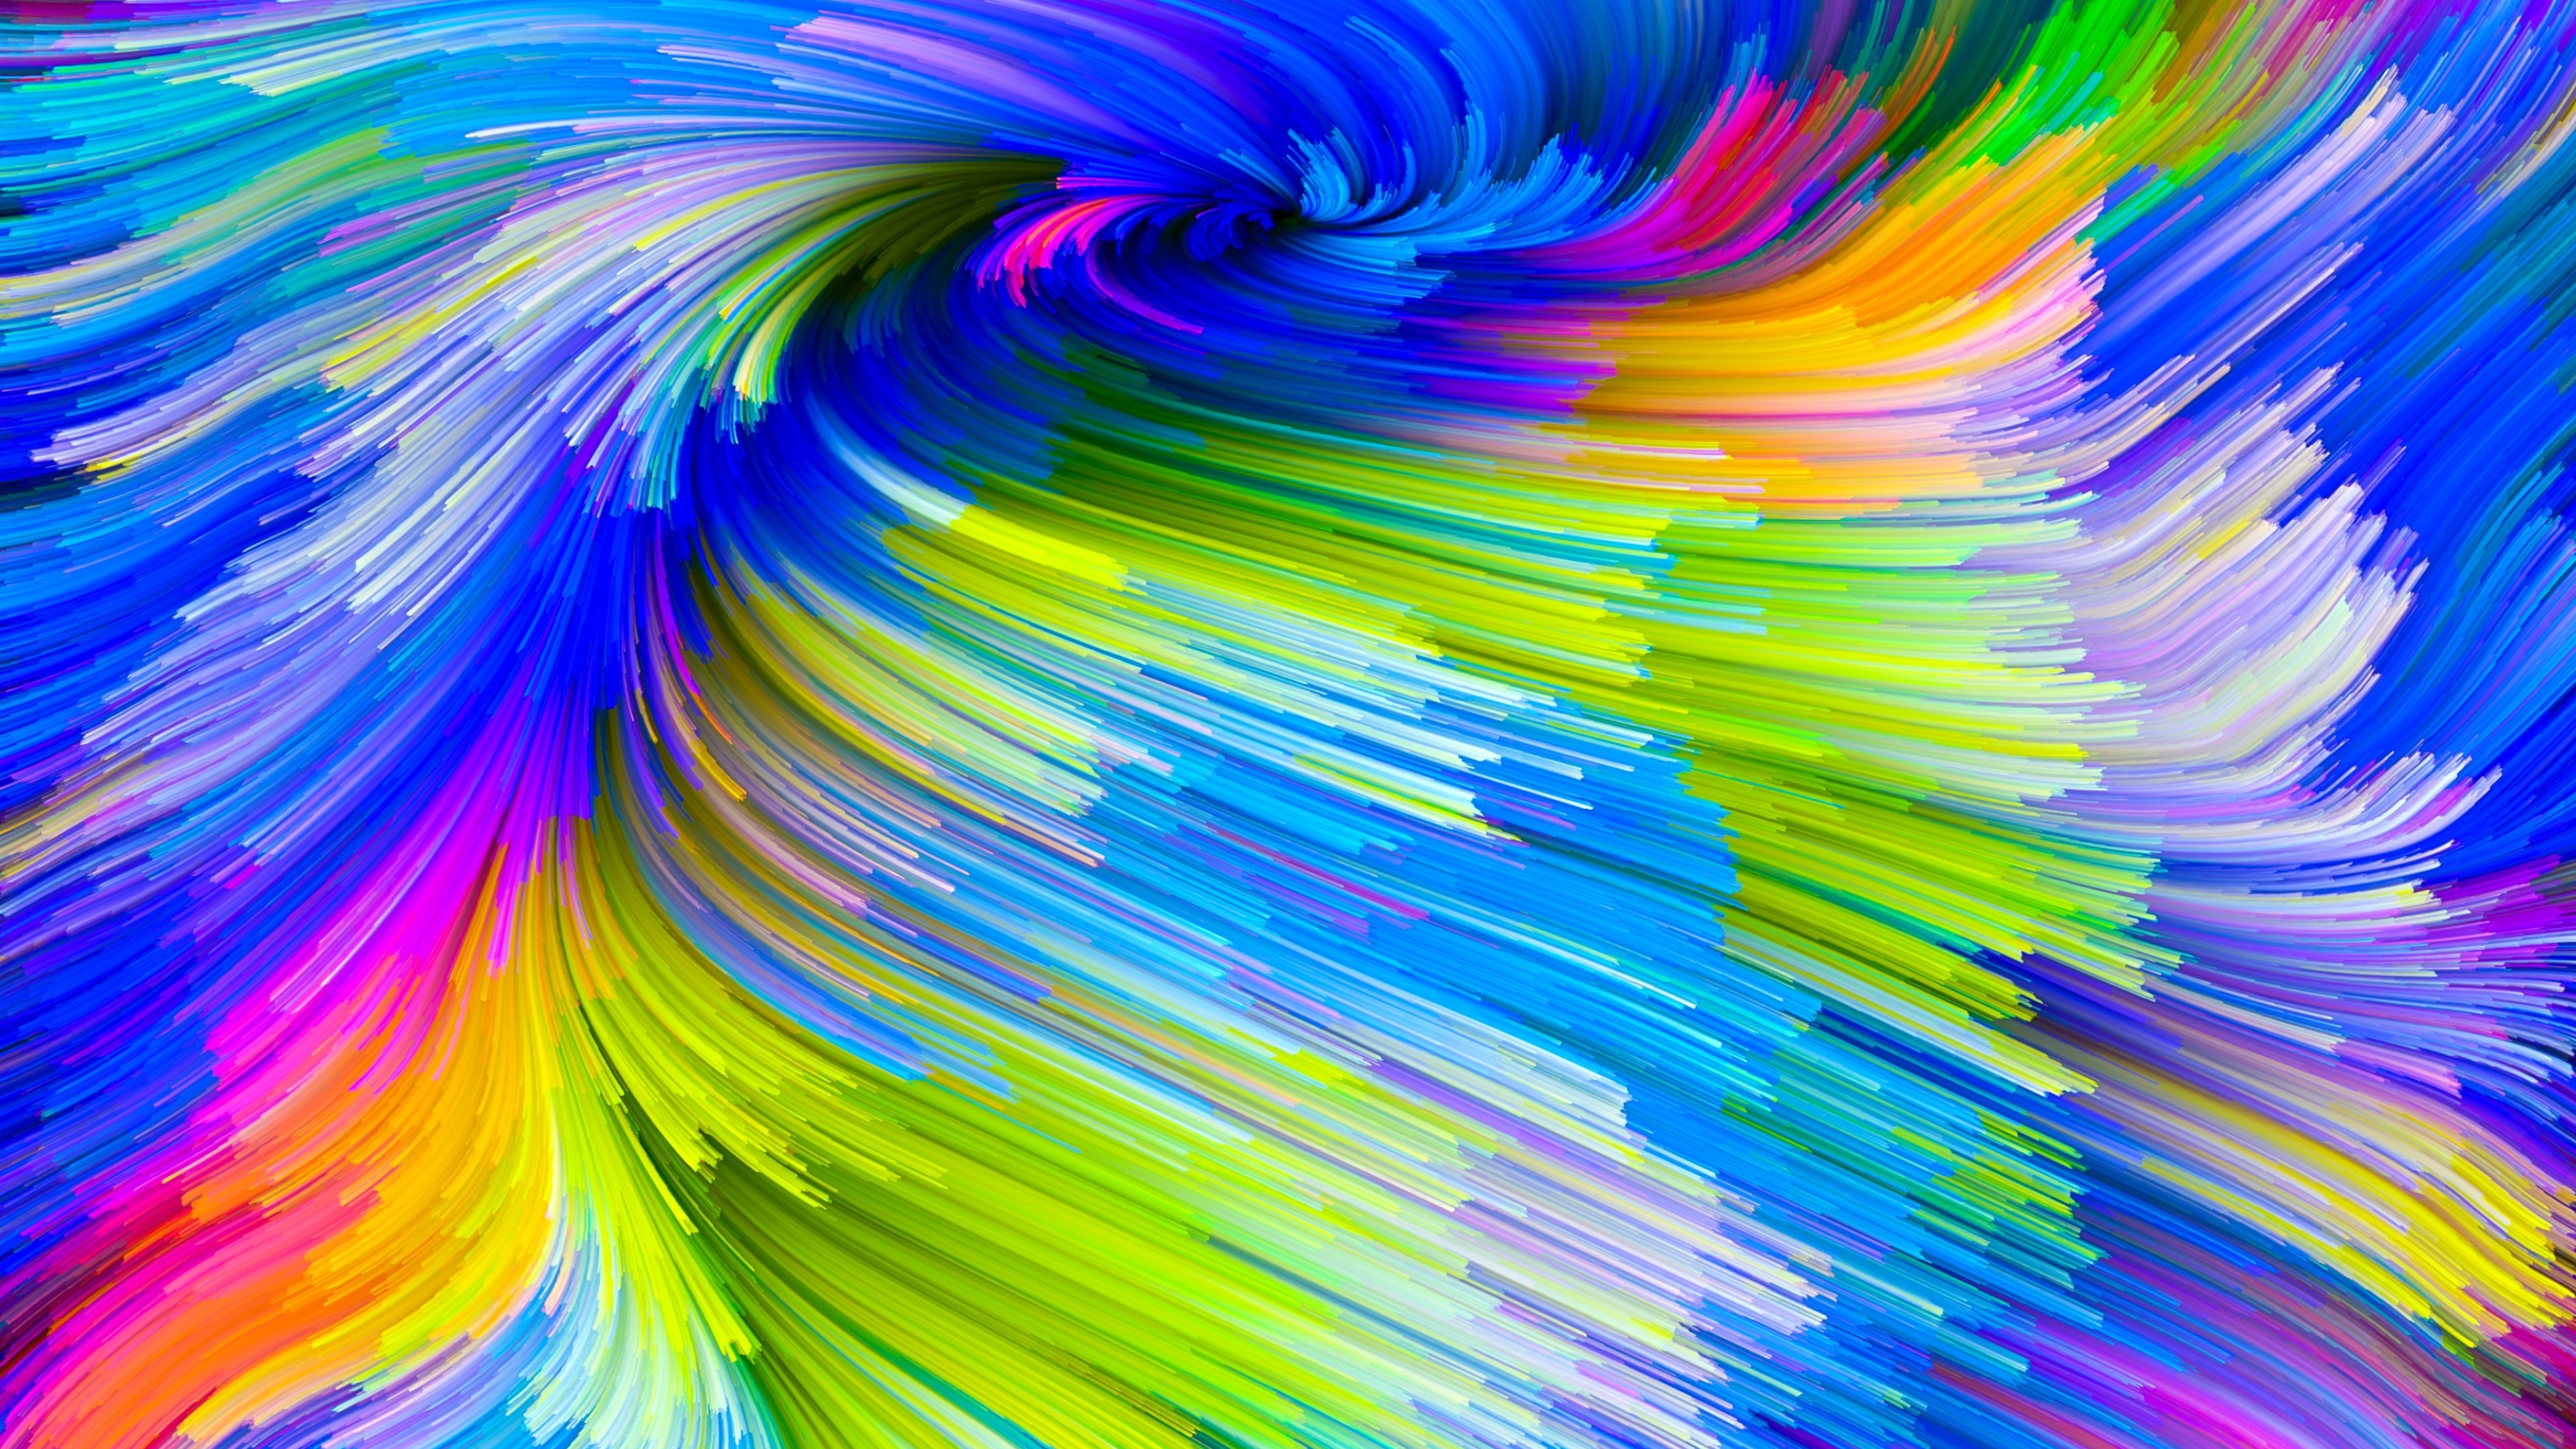 3840x2160 Rainbow Paint Splash 4k Wallpaper Hd Abstract 4k Wallpapers Images Photos And Background